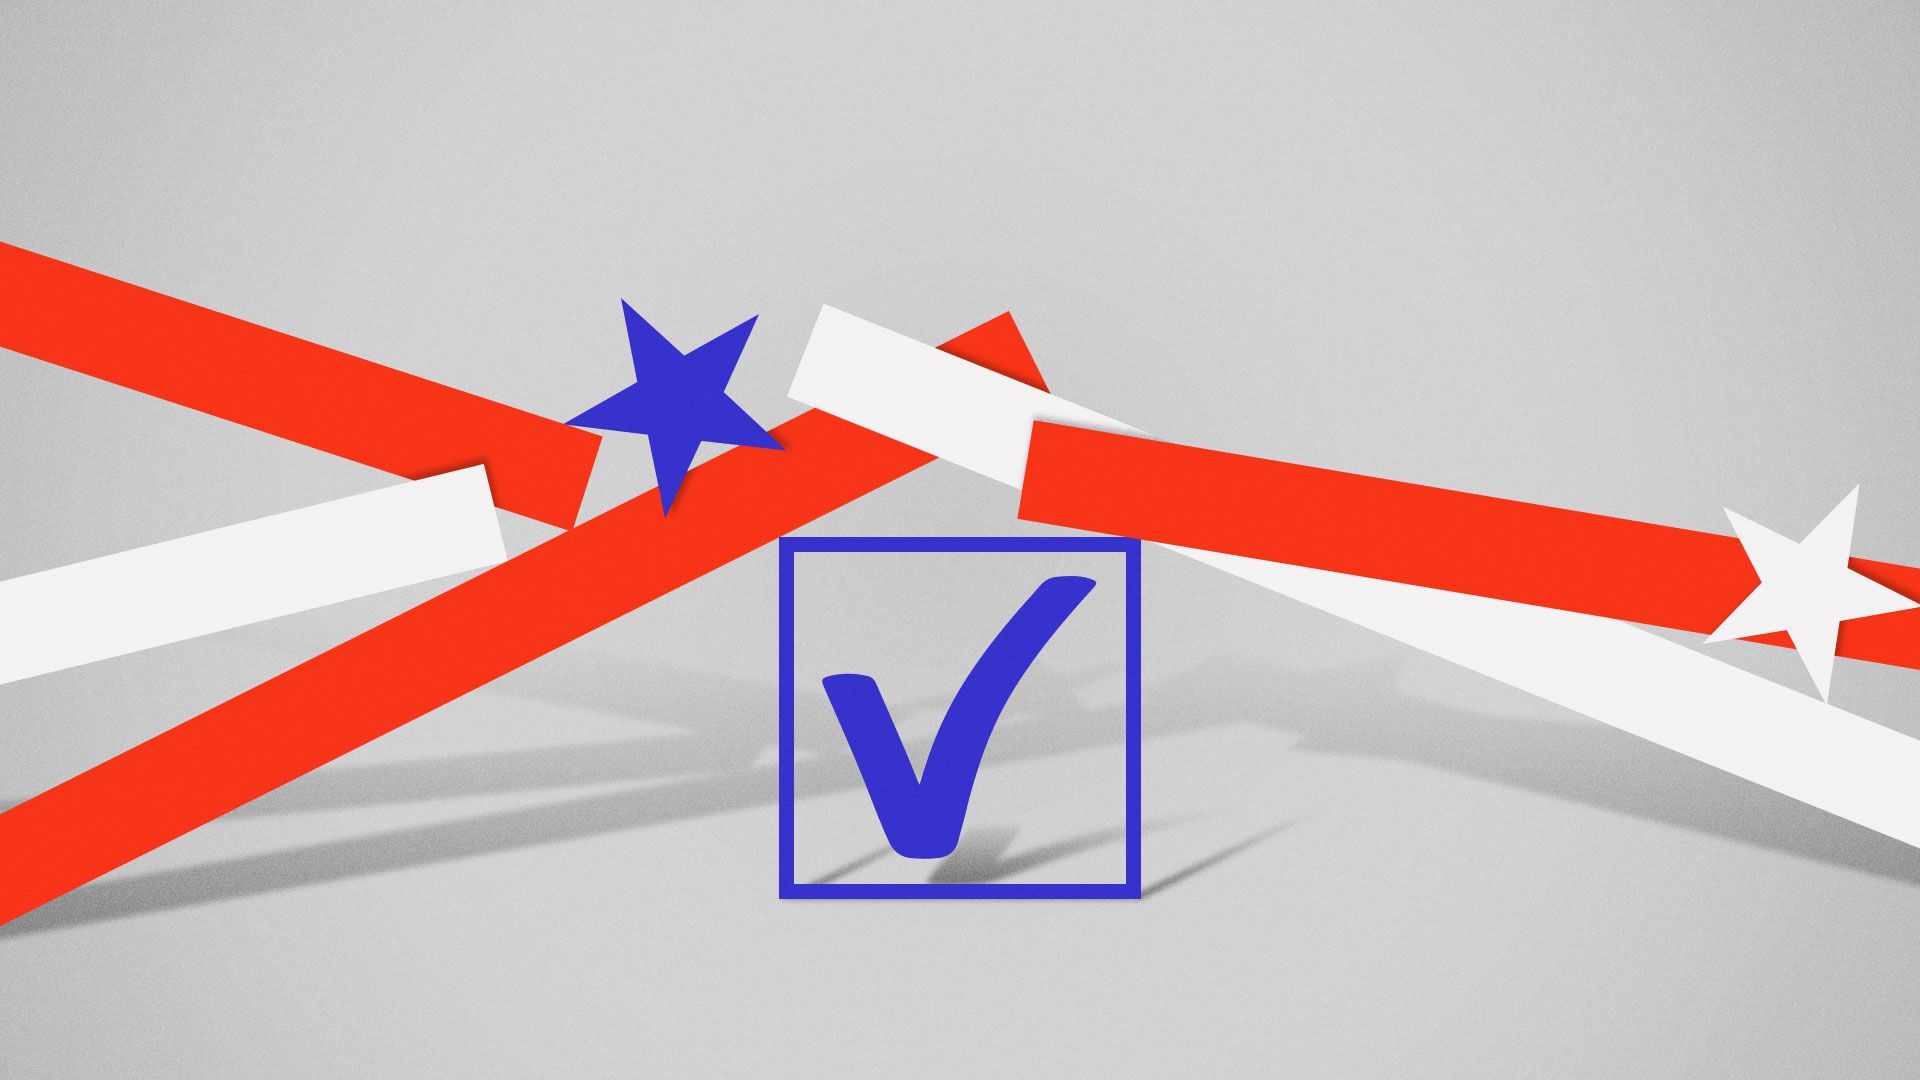 Illustration of voter checkbook crushed by stars and stripes